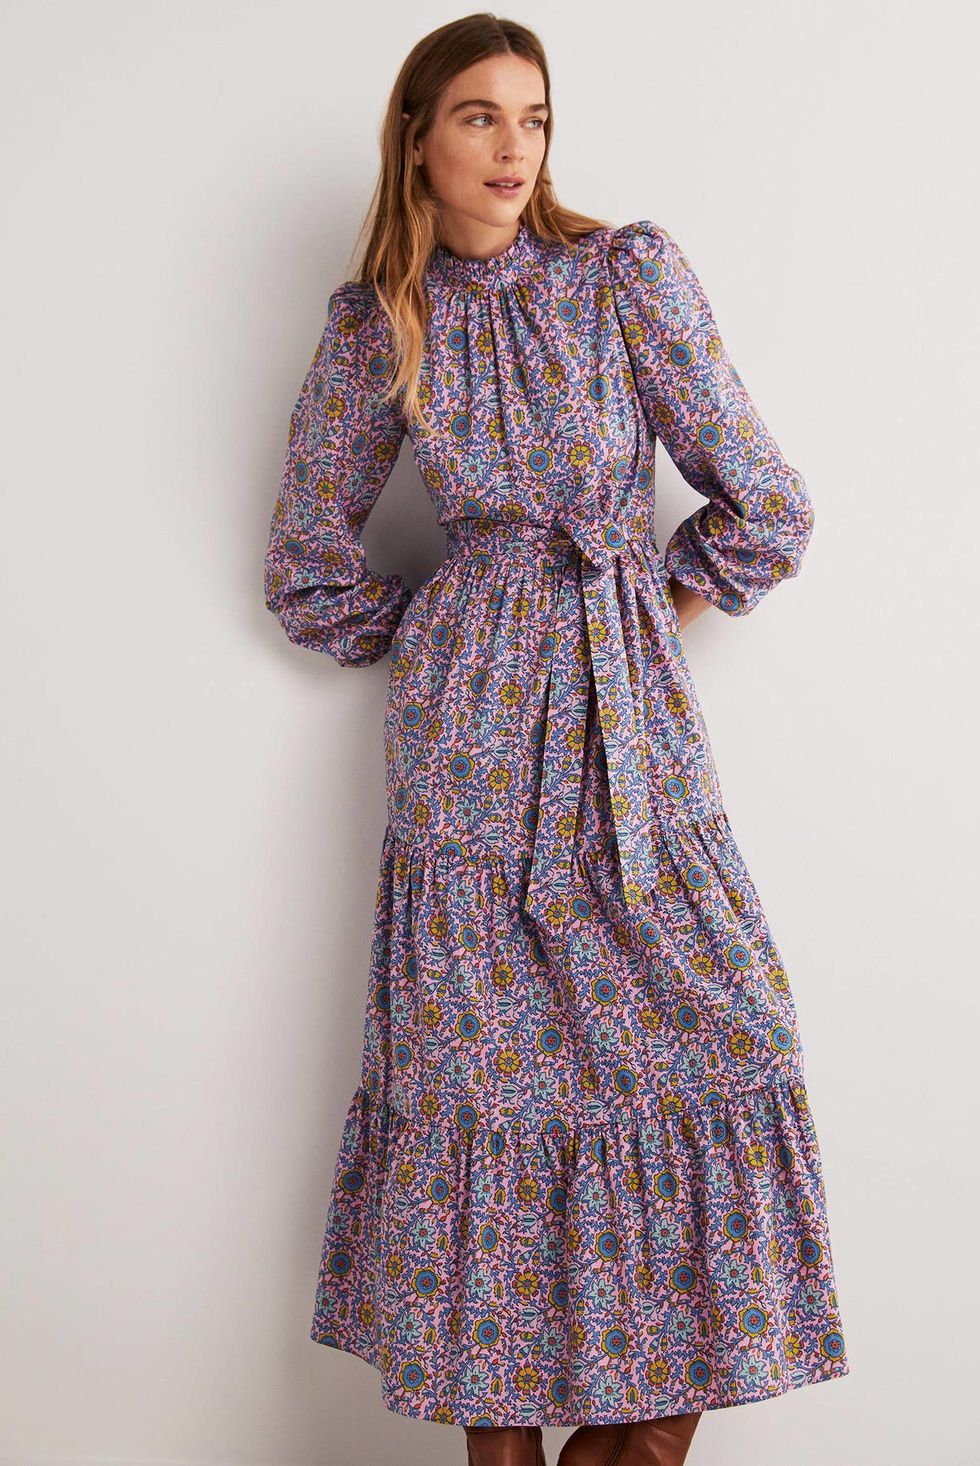 Boden’s cherry blossom maxi dress is the staple of the season